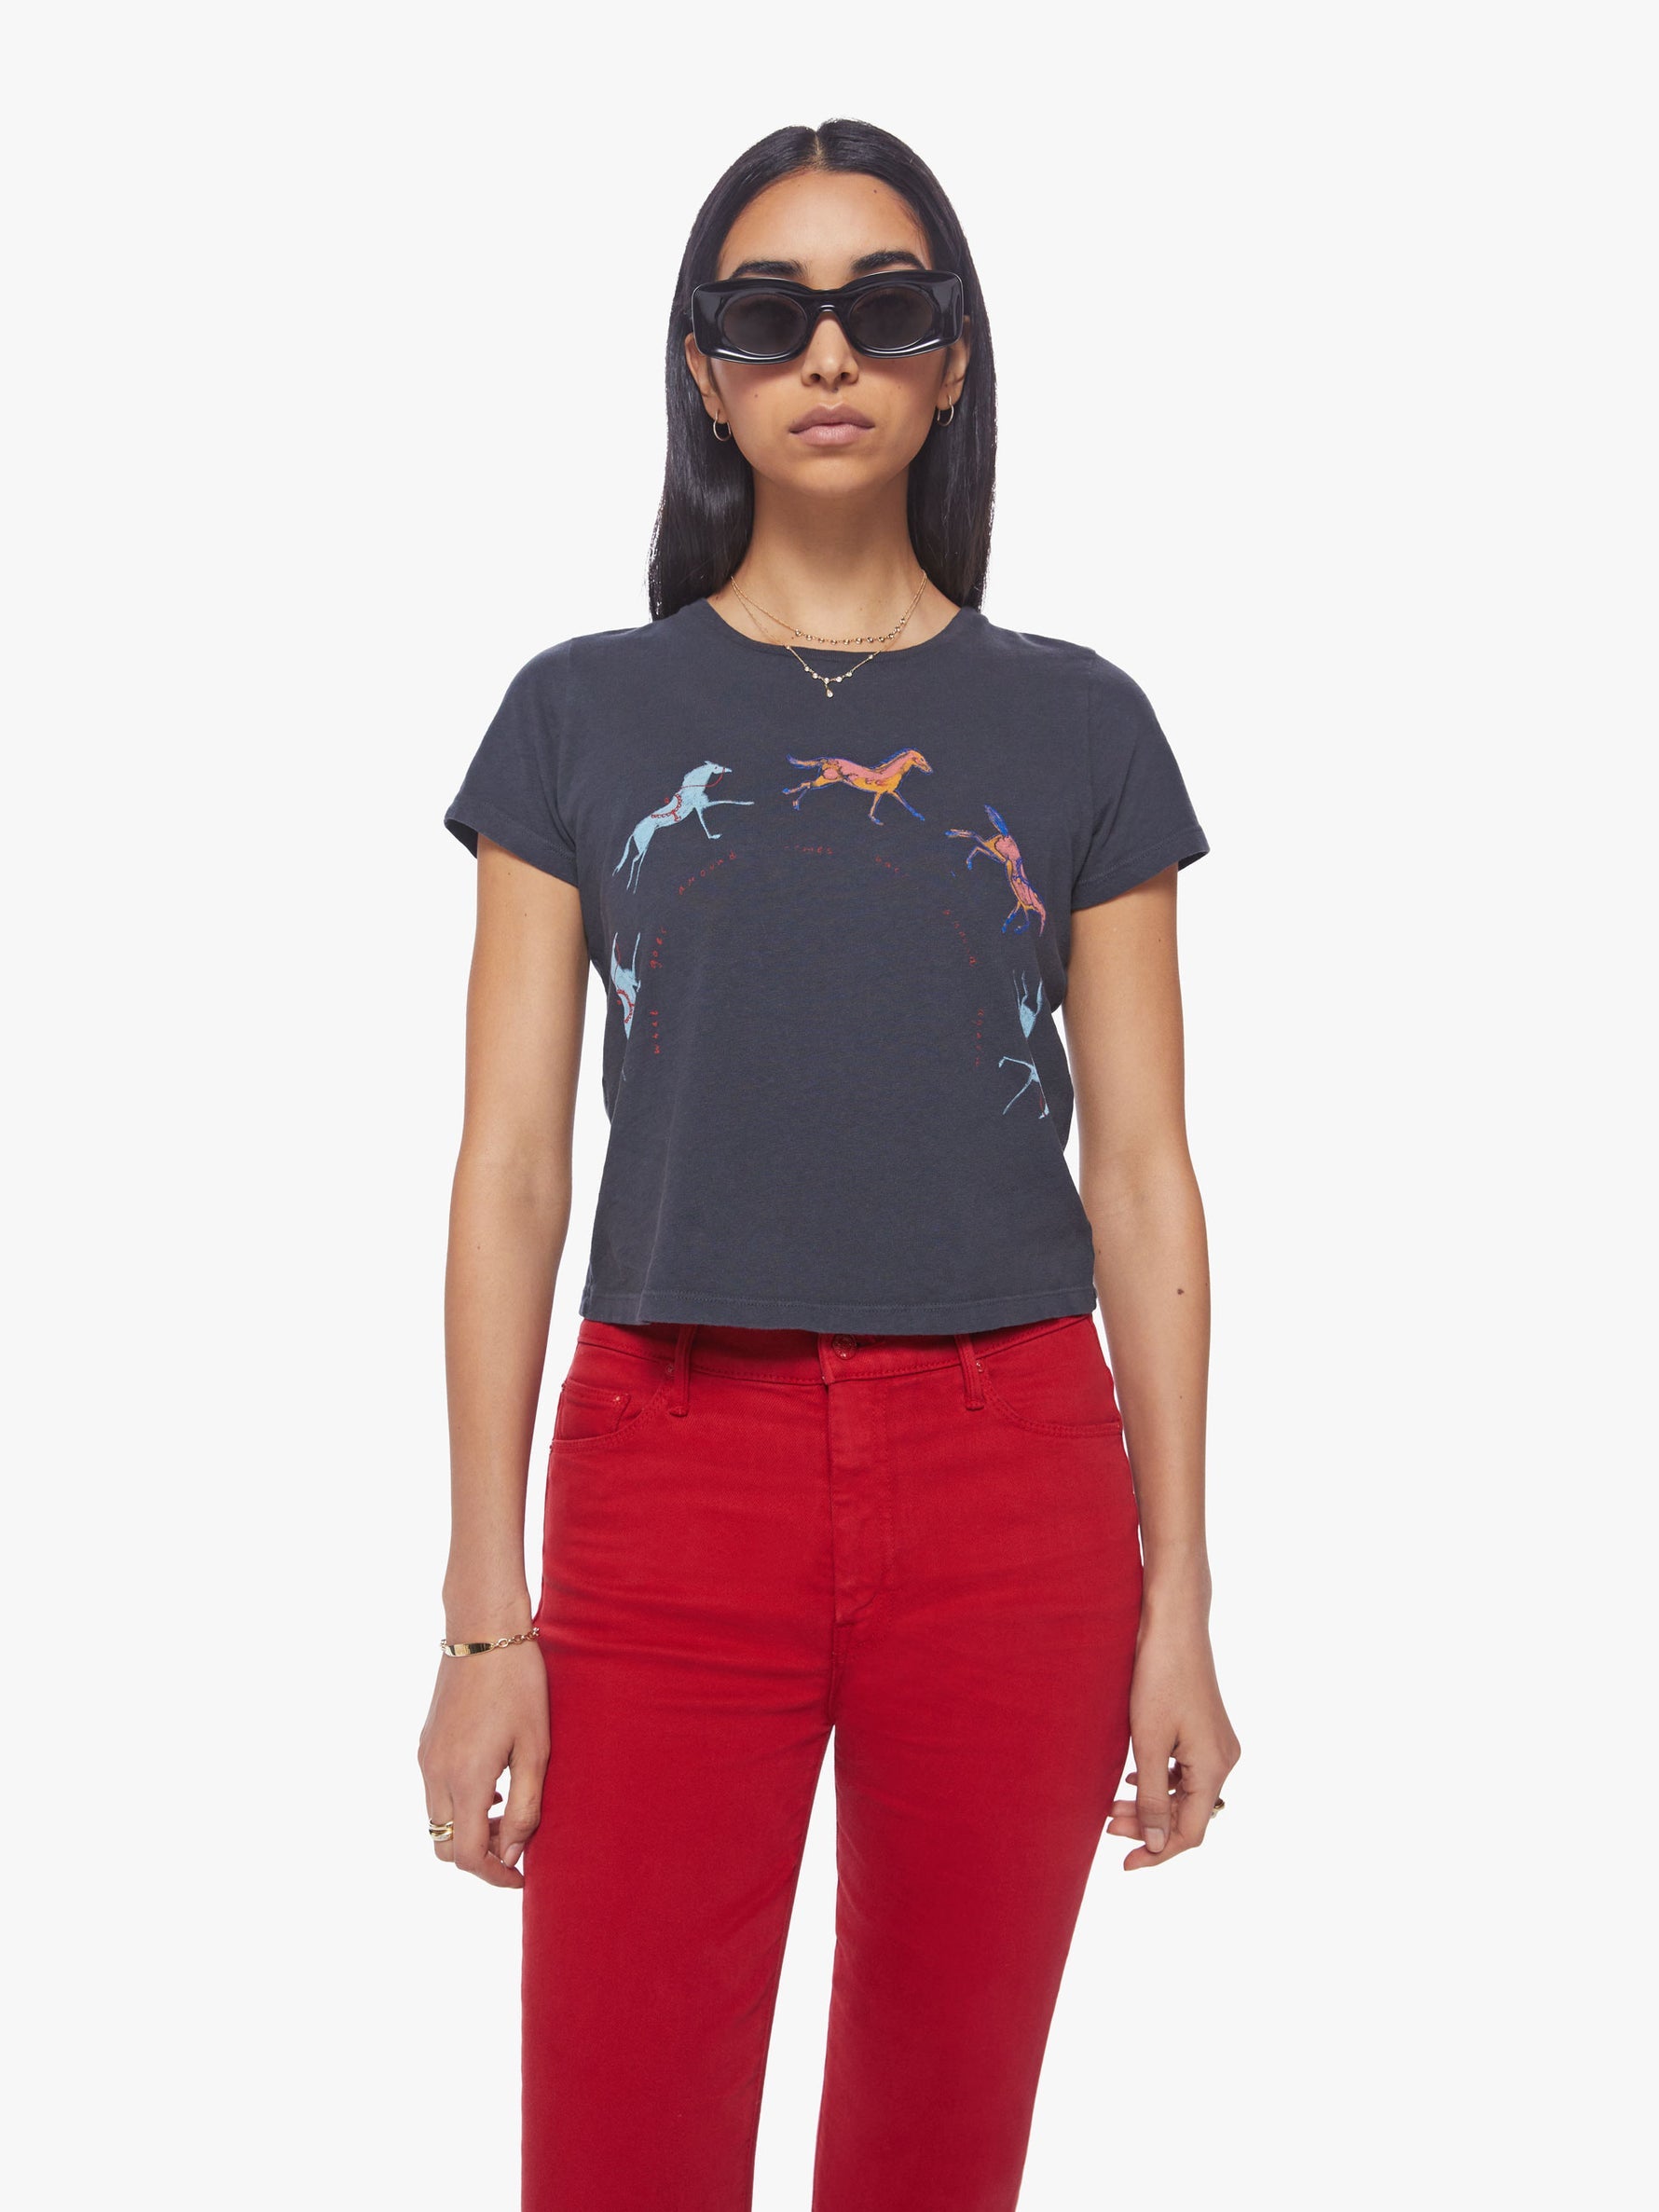 Cropped Itty Bitty Goodie Tee in Horsin Around